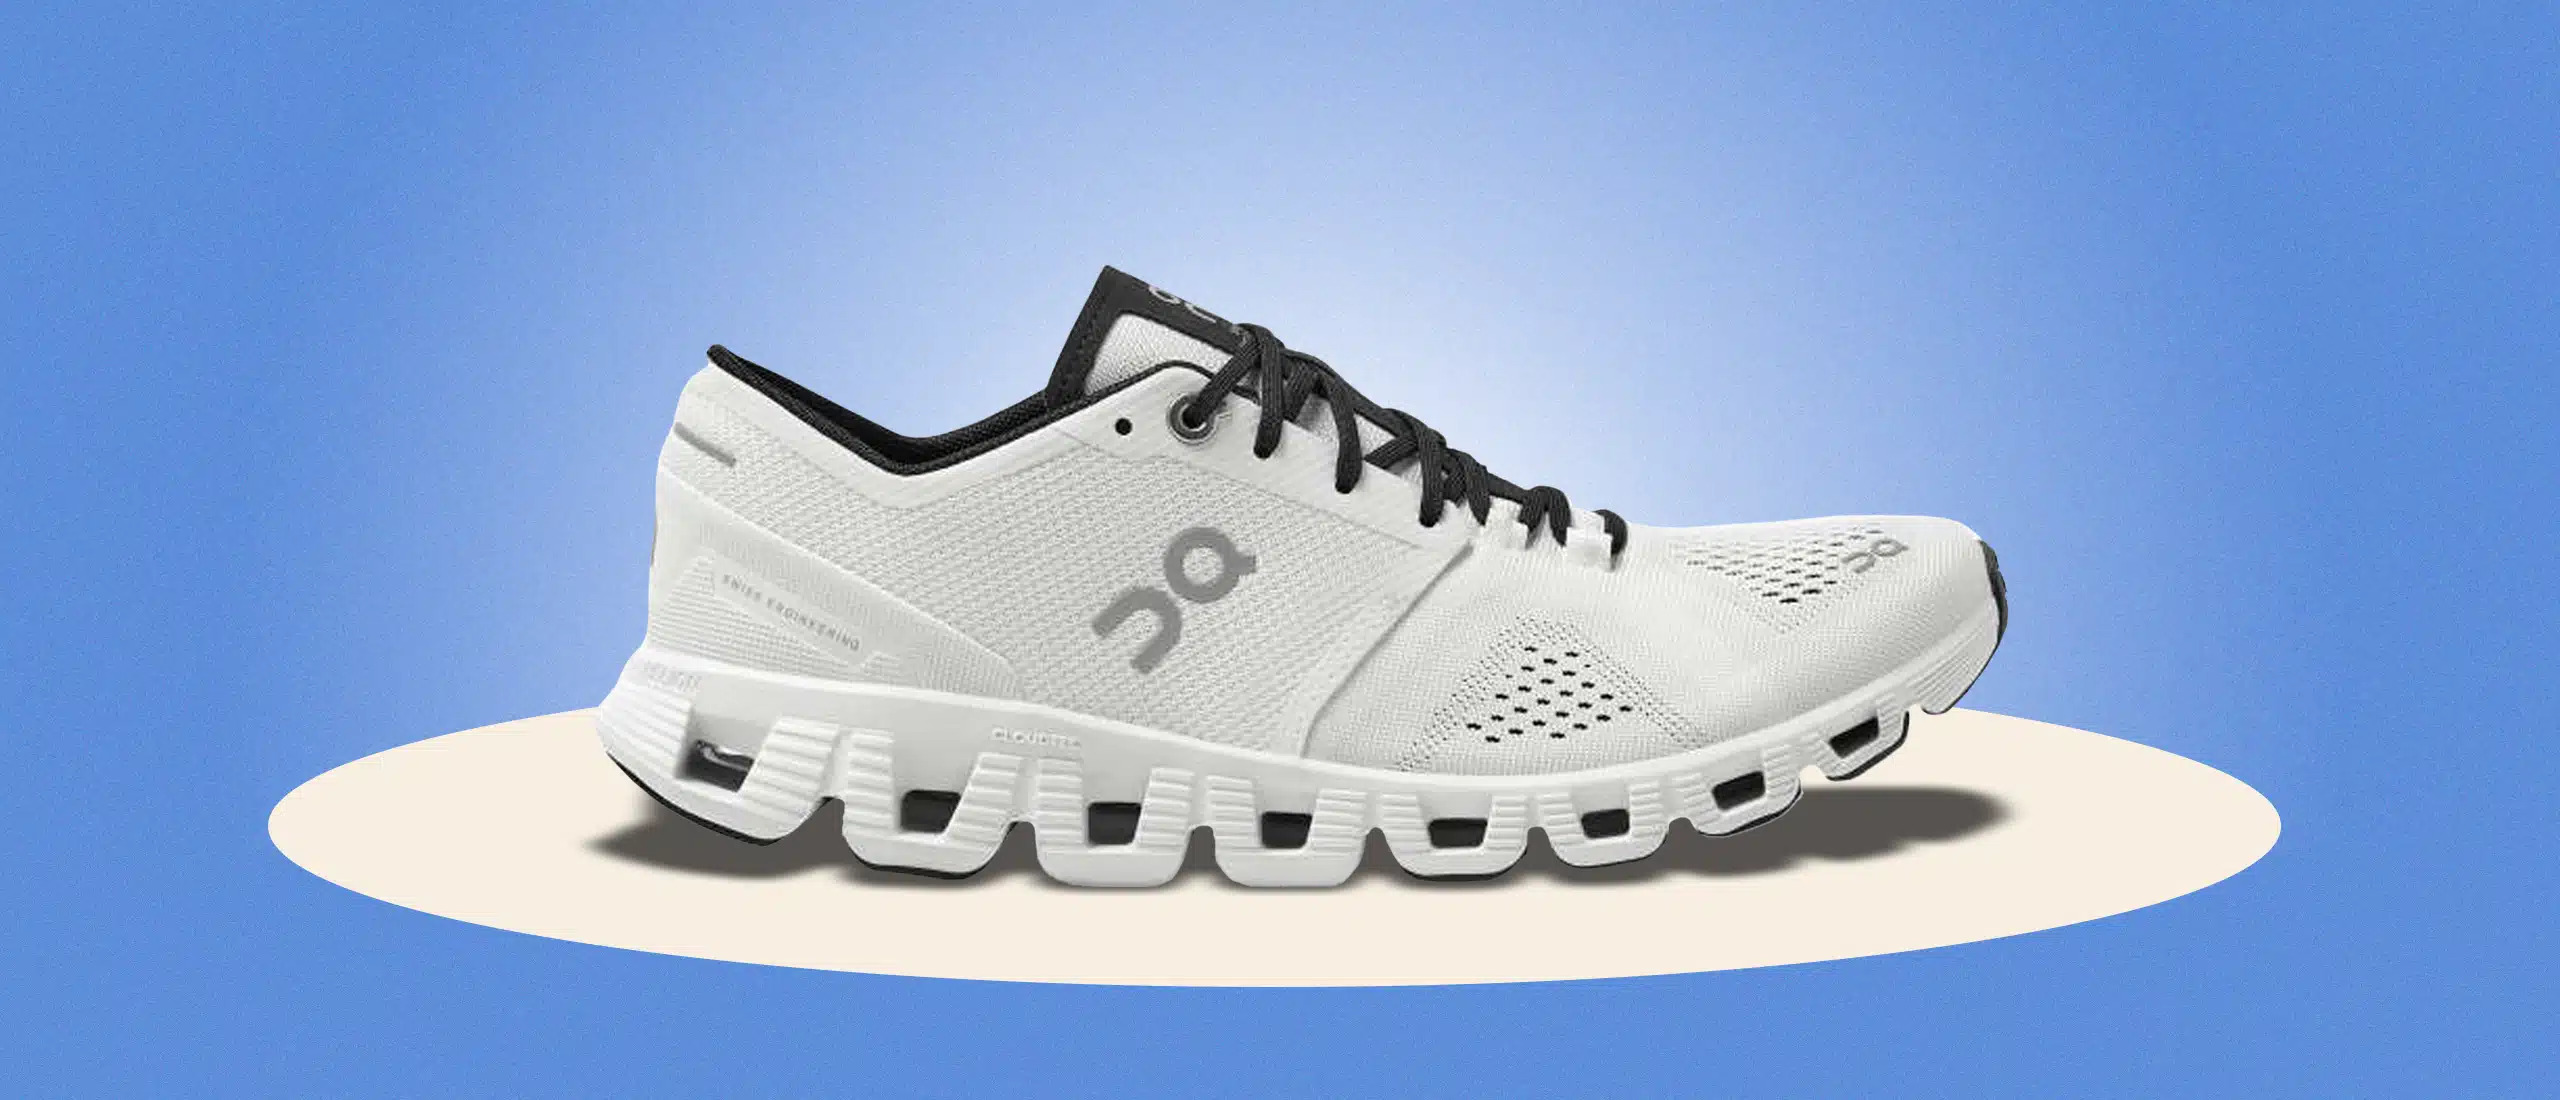 Where Can I Buy On Cloud Running Shoes